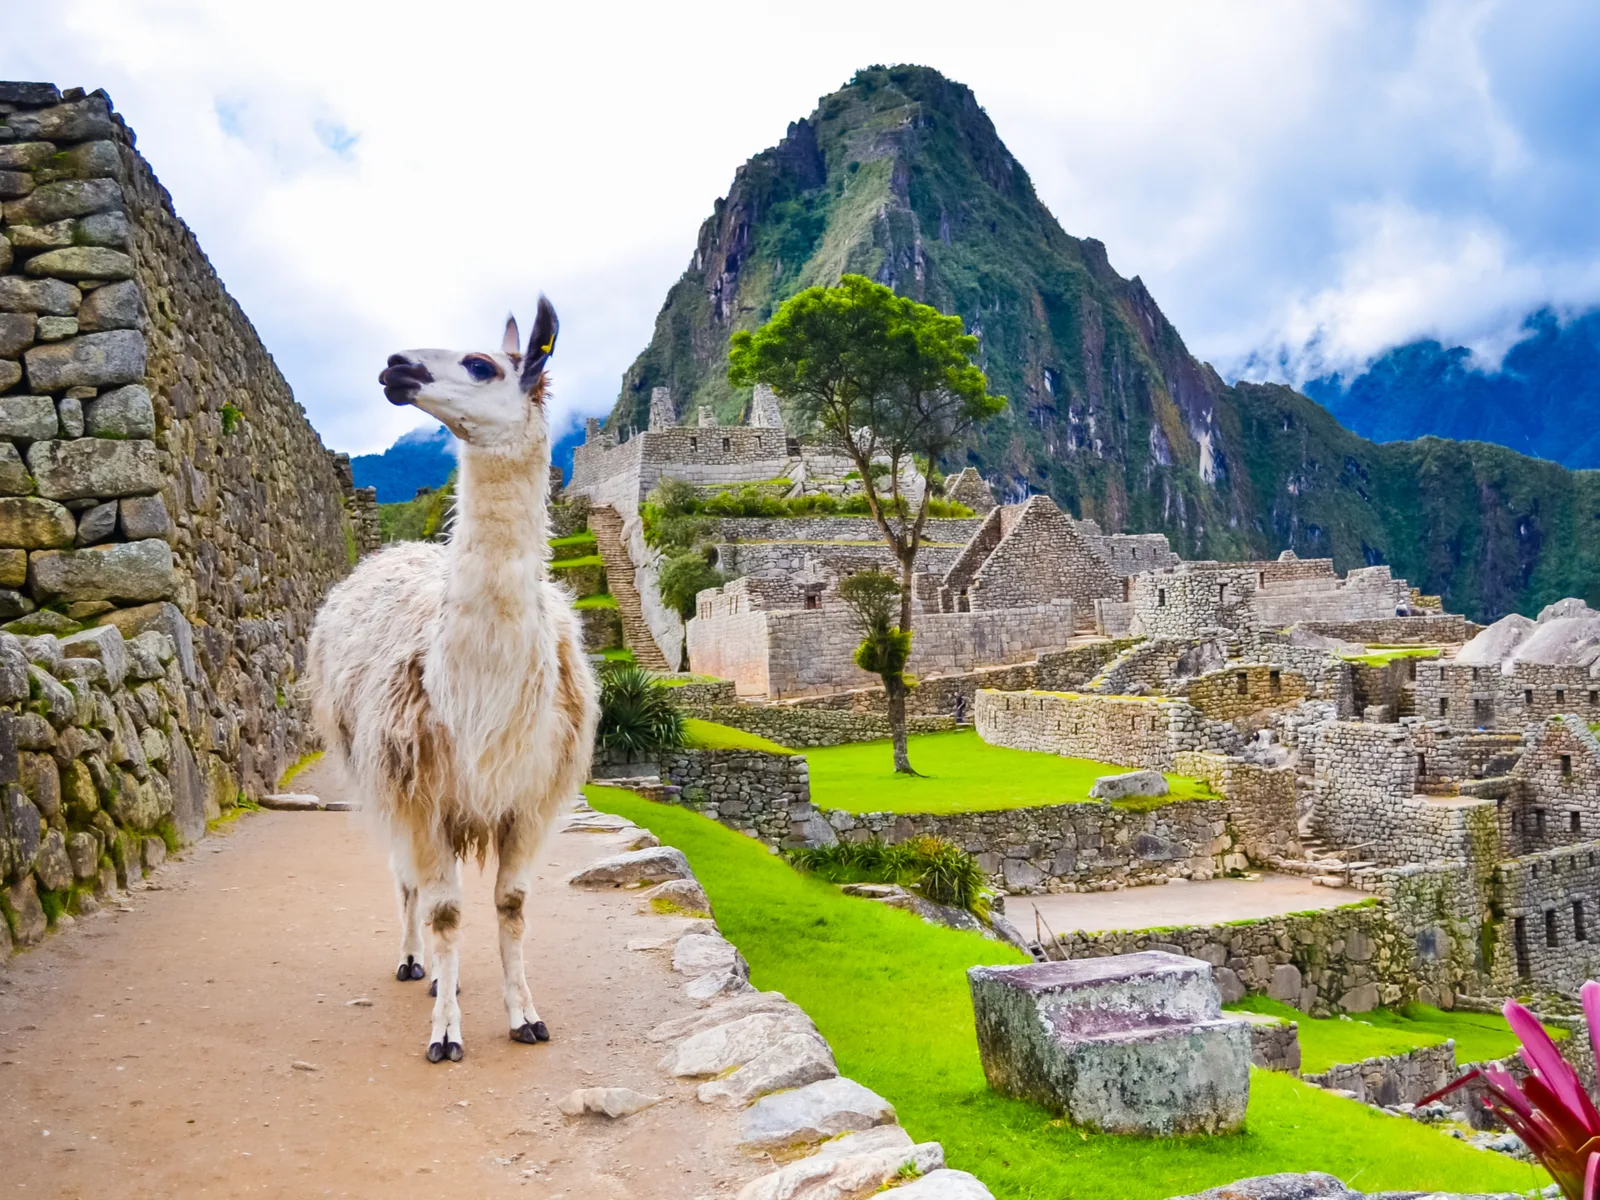 Llama standing on the side of a walkway next to a wall during the best time to visit Machu Picchu